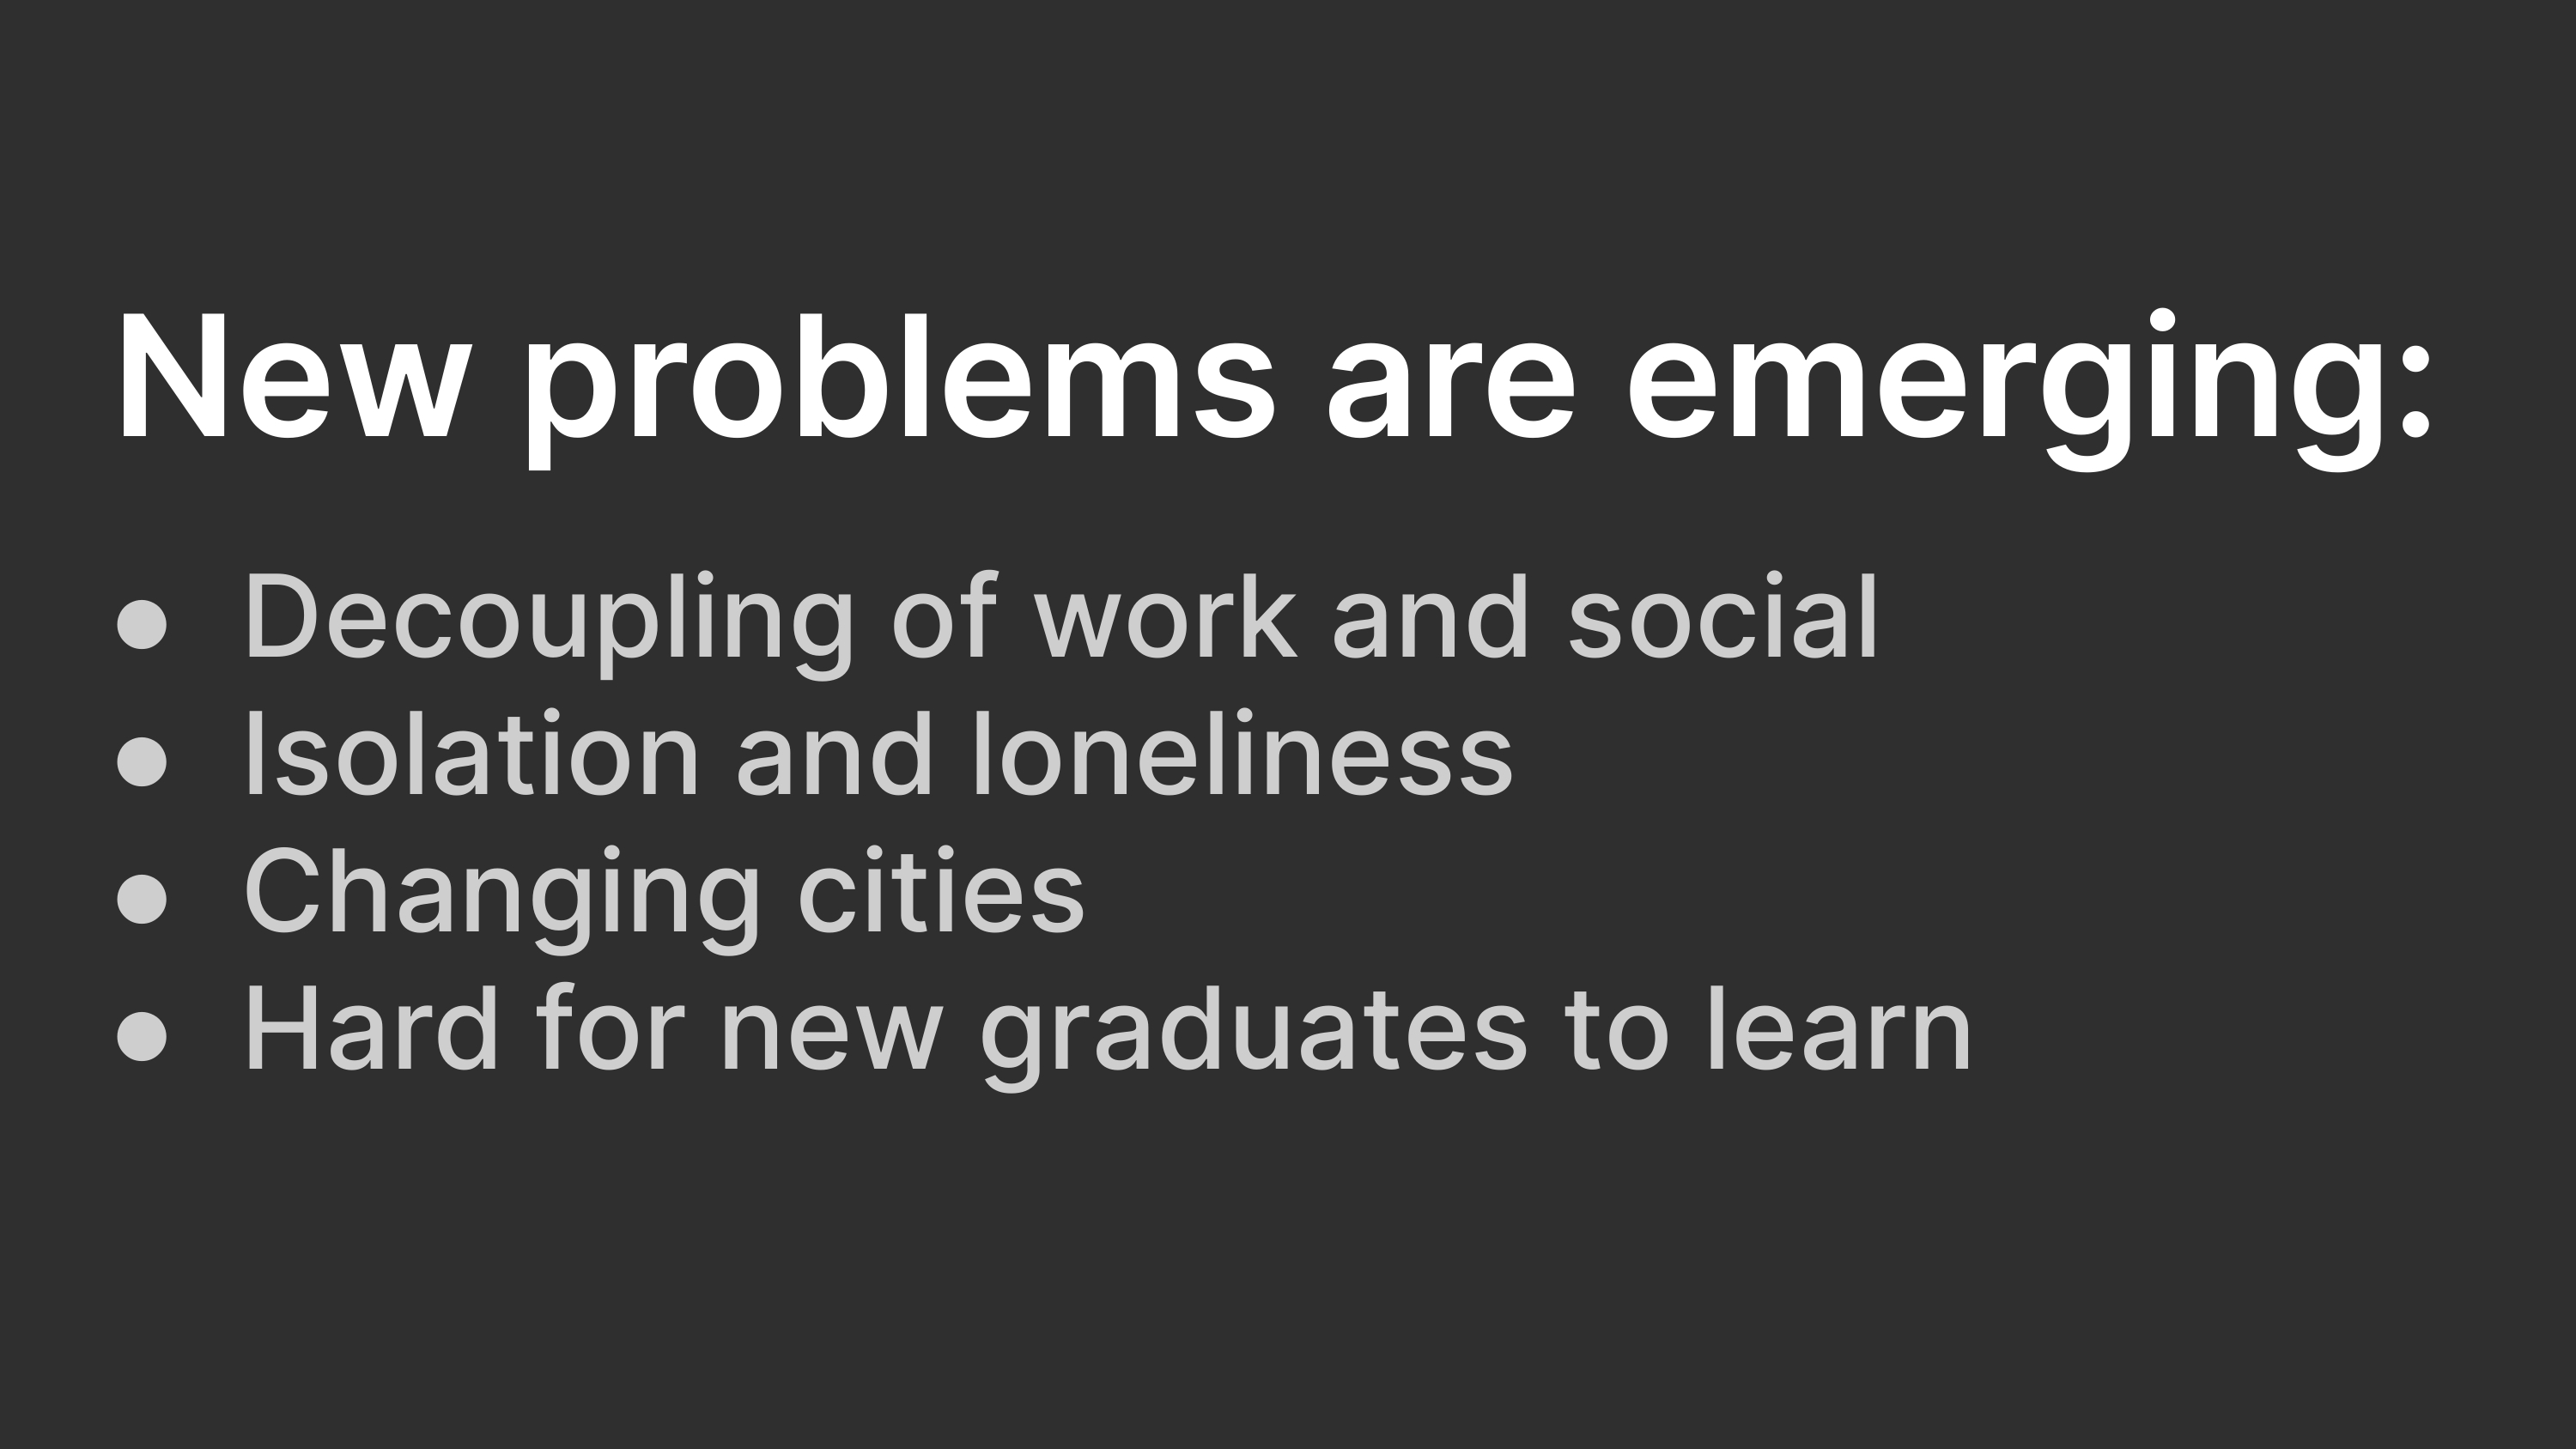 New problems are emerging: Decoupling of work and social; Isolation and loneliness; Changing cities; Hard for new graduates to learn.